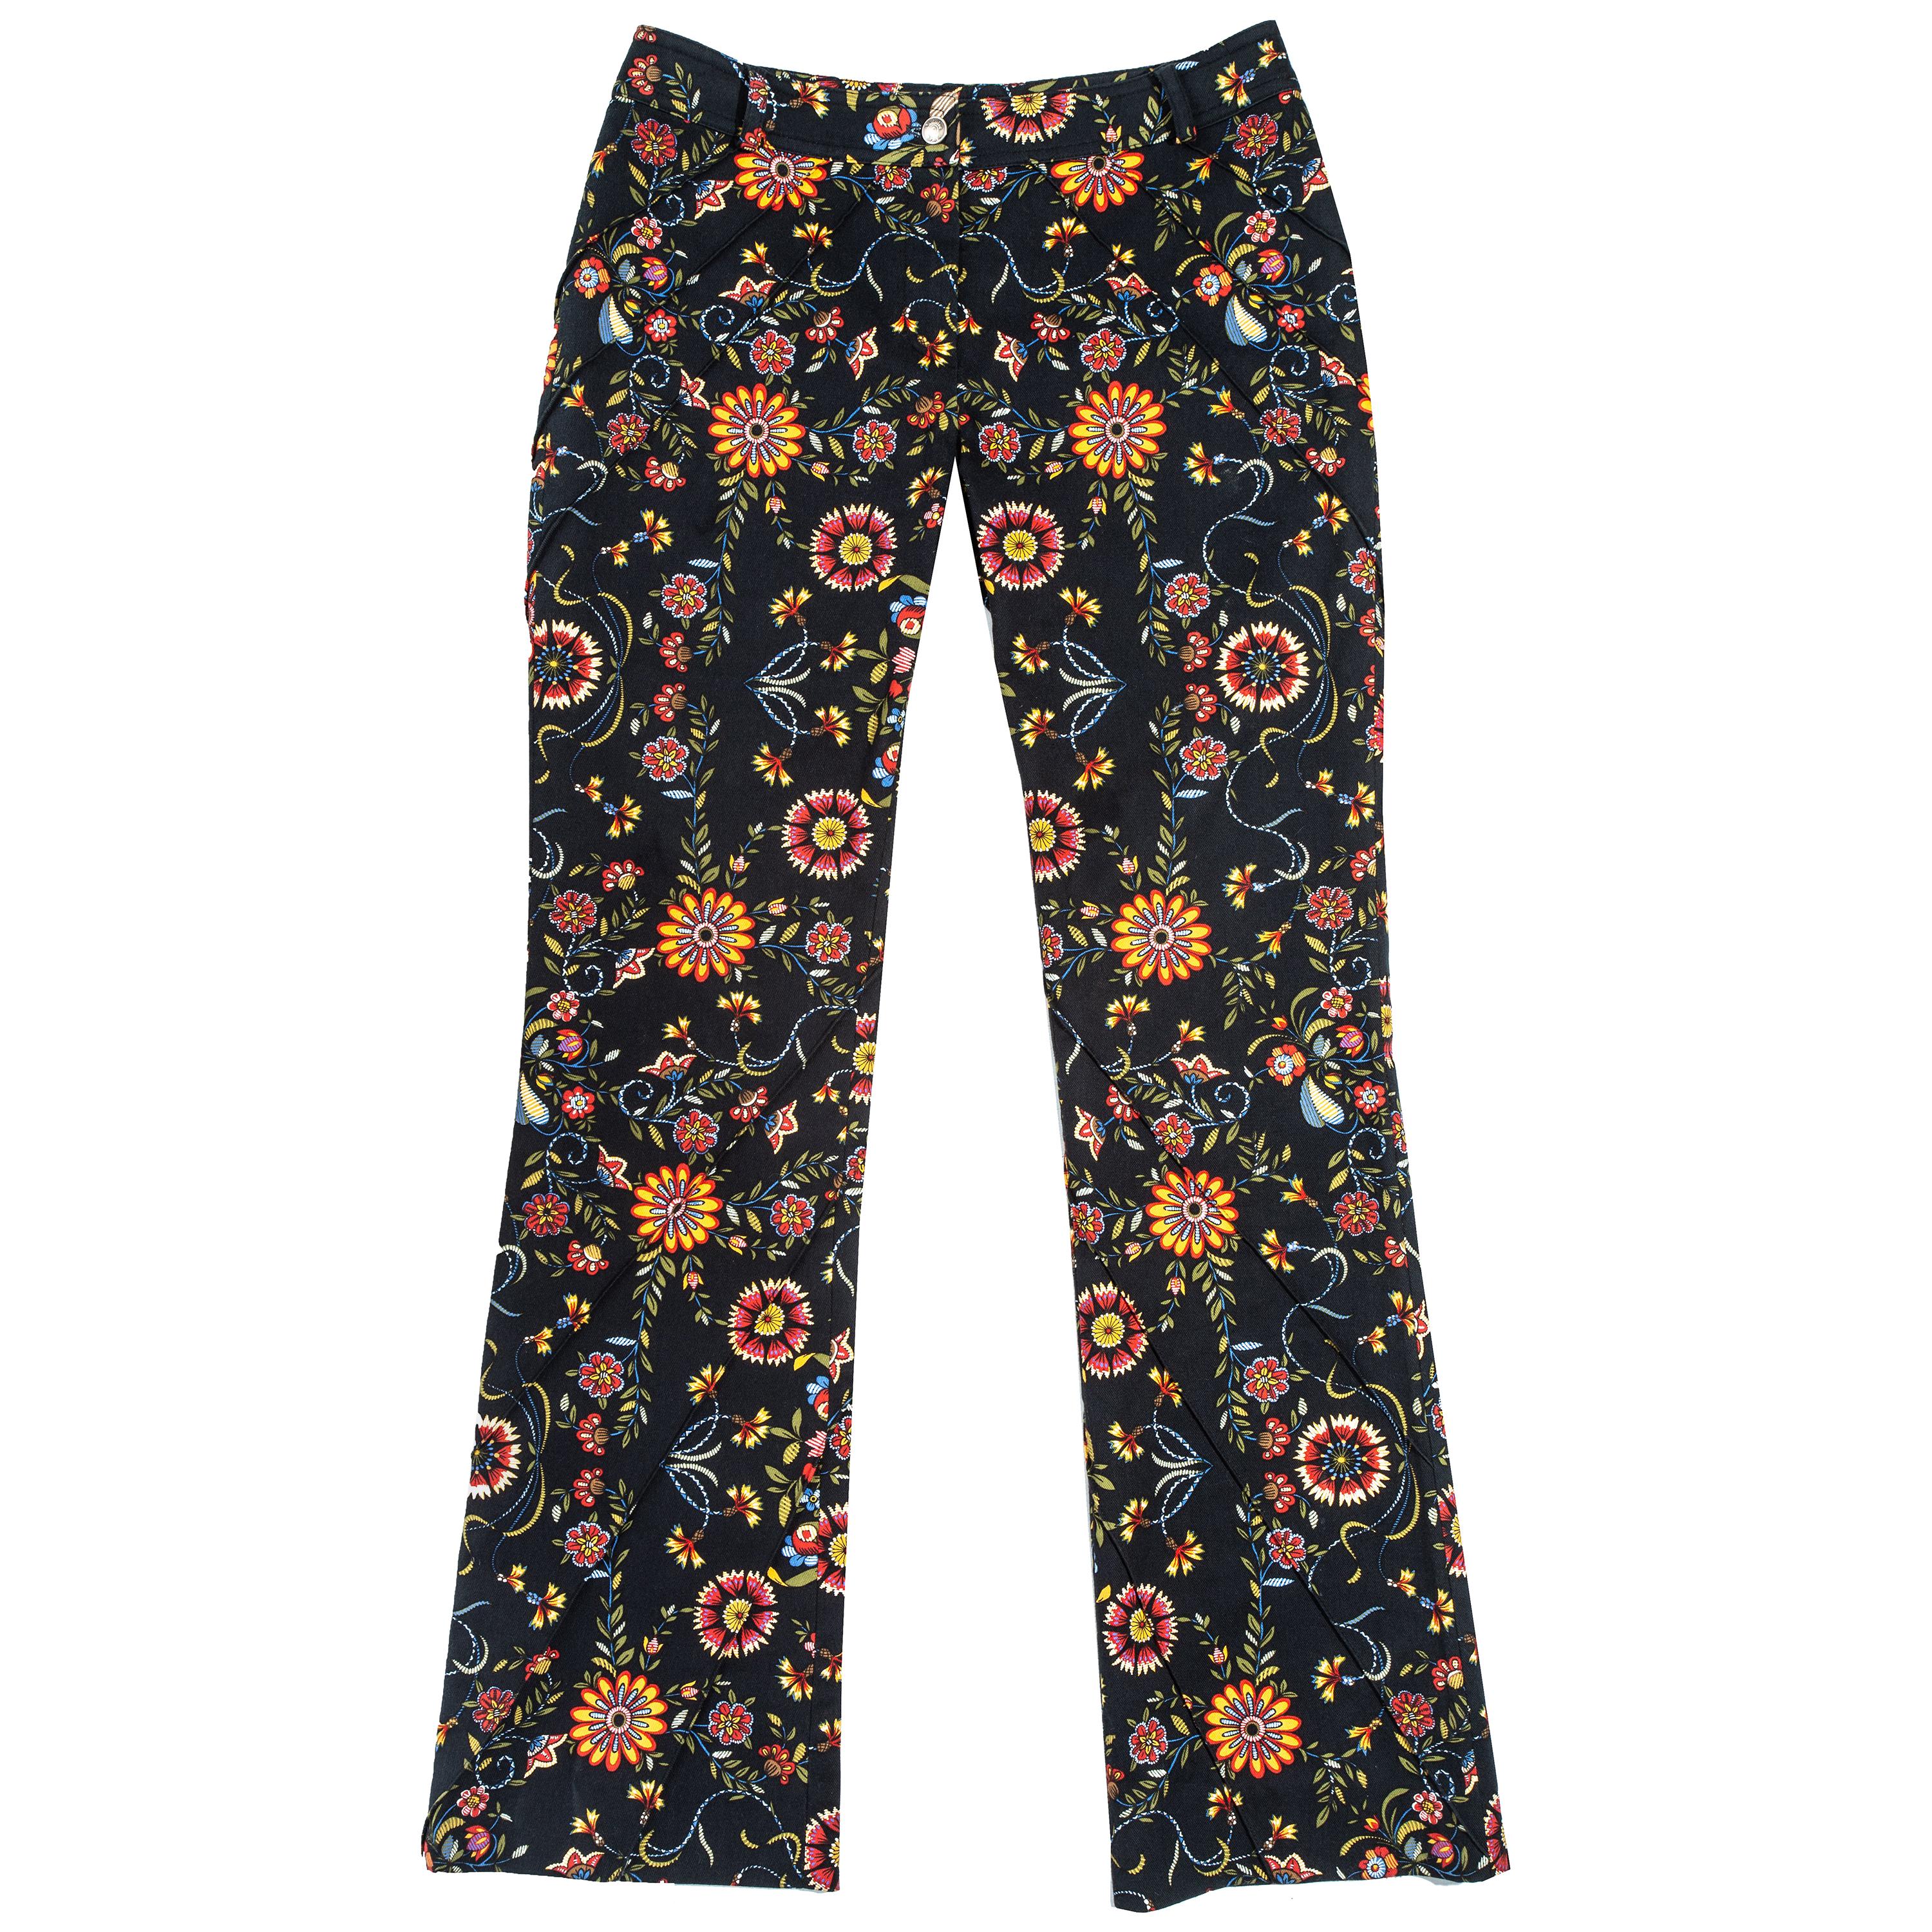 Christian Dior by John Galliano floral printed cotton flared pants, fw 2002